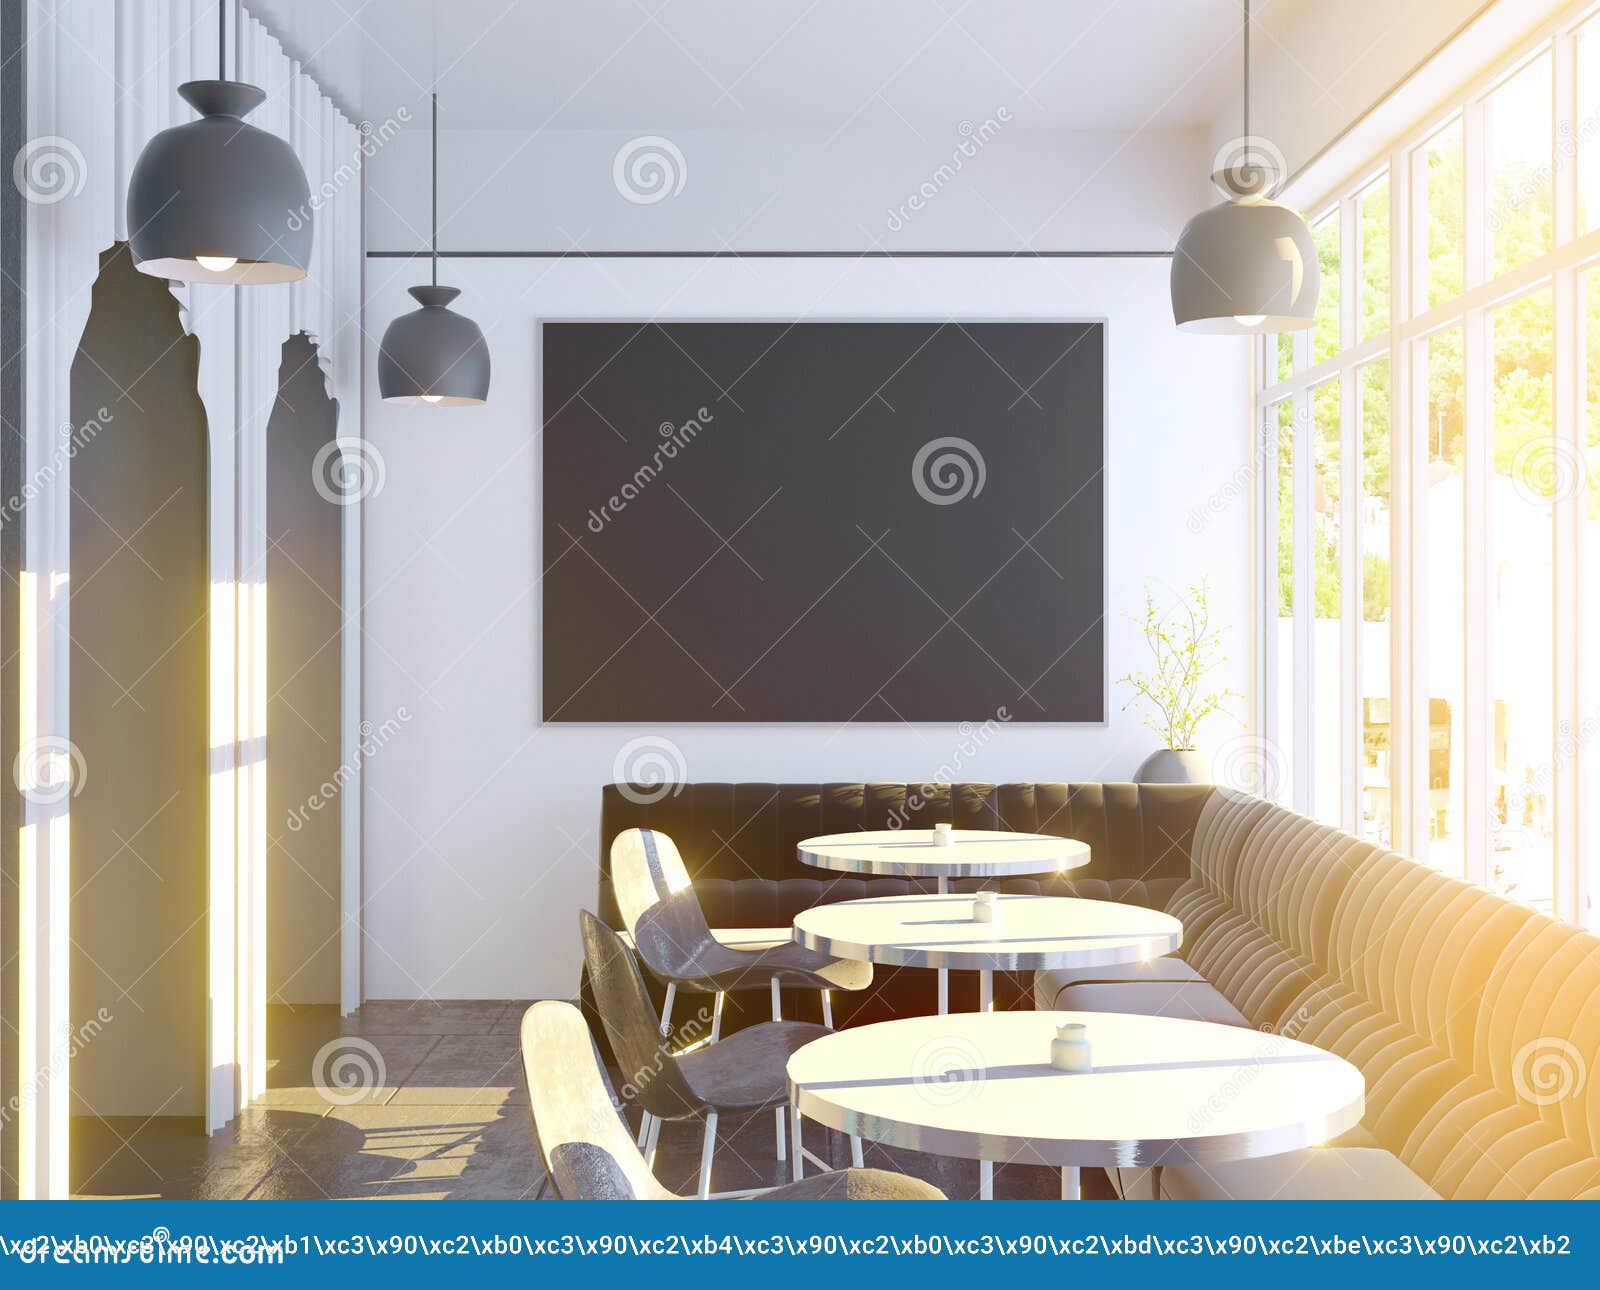 Download Cafe Interior With A Large Sofa, Wooden Floor. 3d Rendering. Illustration Mock Up. Stock ...